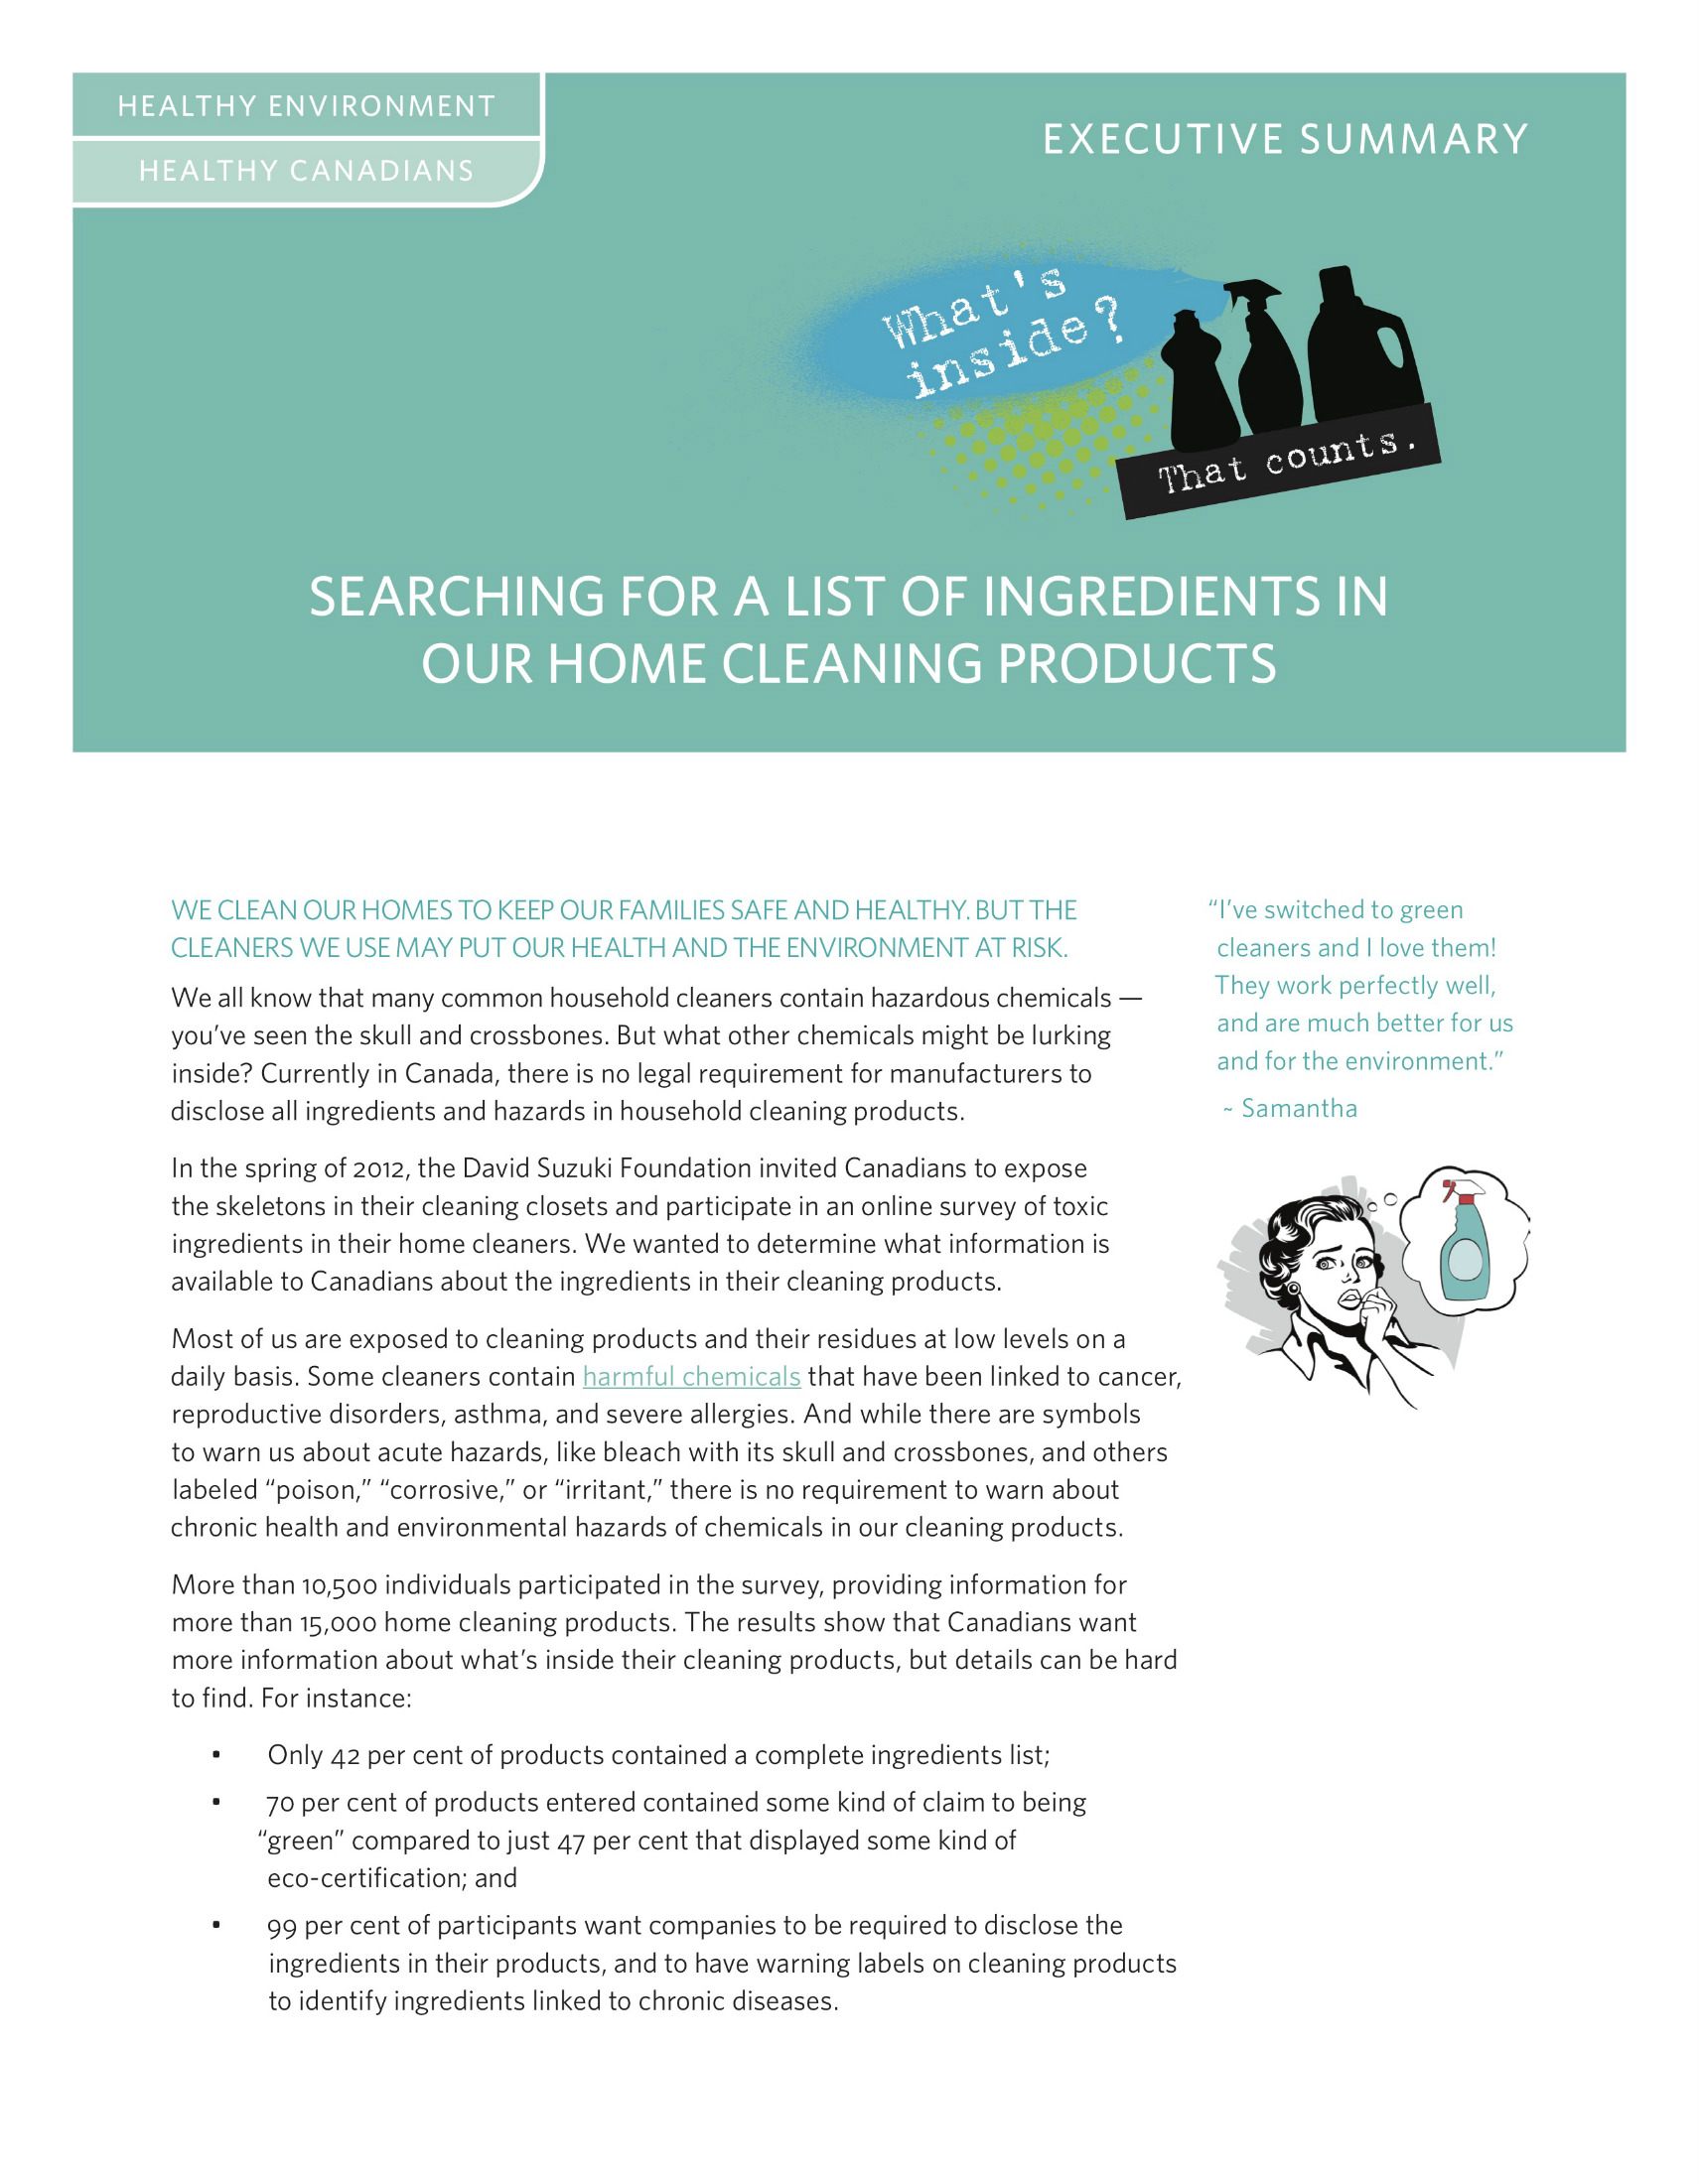 EXECUTIVE SUMMARY — Searching for a List of Ingredients in Home Cleaning Products